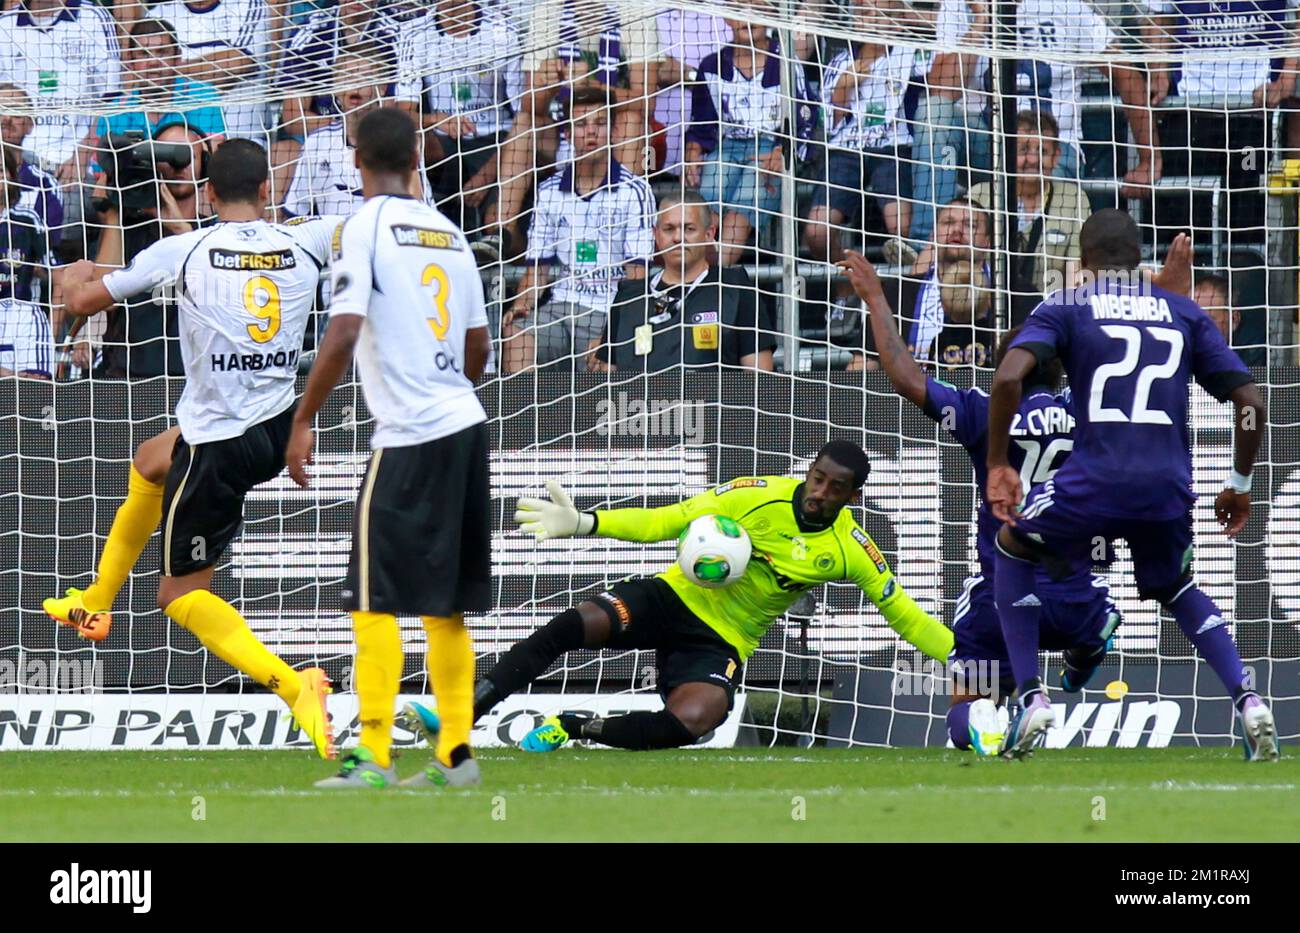 Lokeren's goalkeeper Barry Boubacar Copa pictured during the Jupiler Pro League match between RSCA Anderlecht and Sporting Lokeren, in Anderlecht, Sunday 28 July 2013, on the first day of the Belgian soccer championship.  Stock Photo